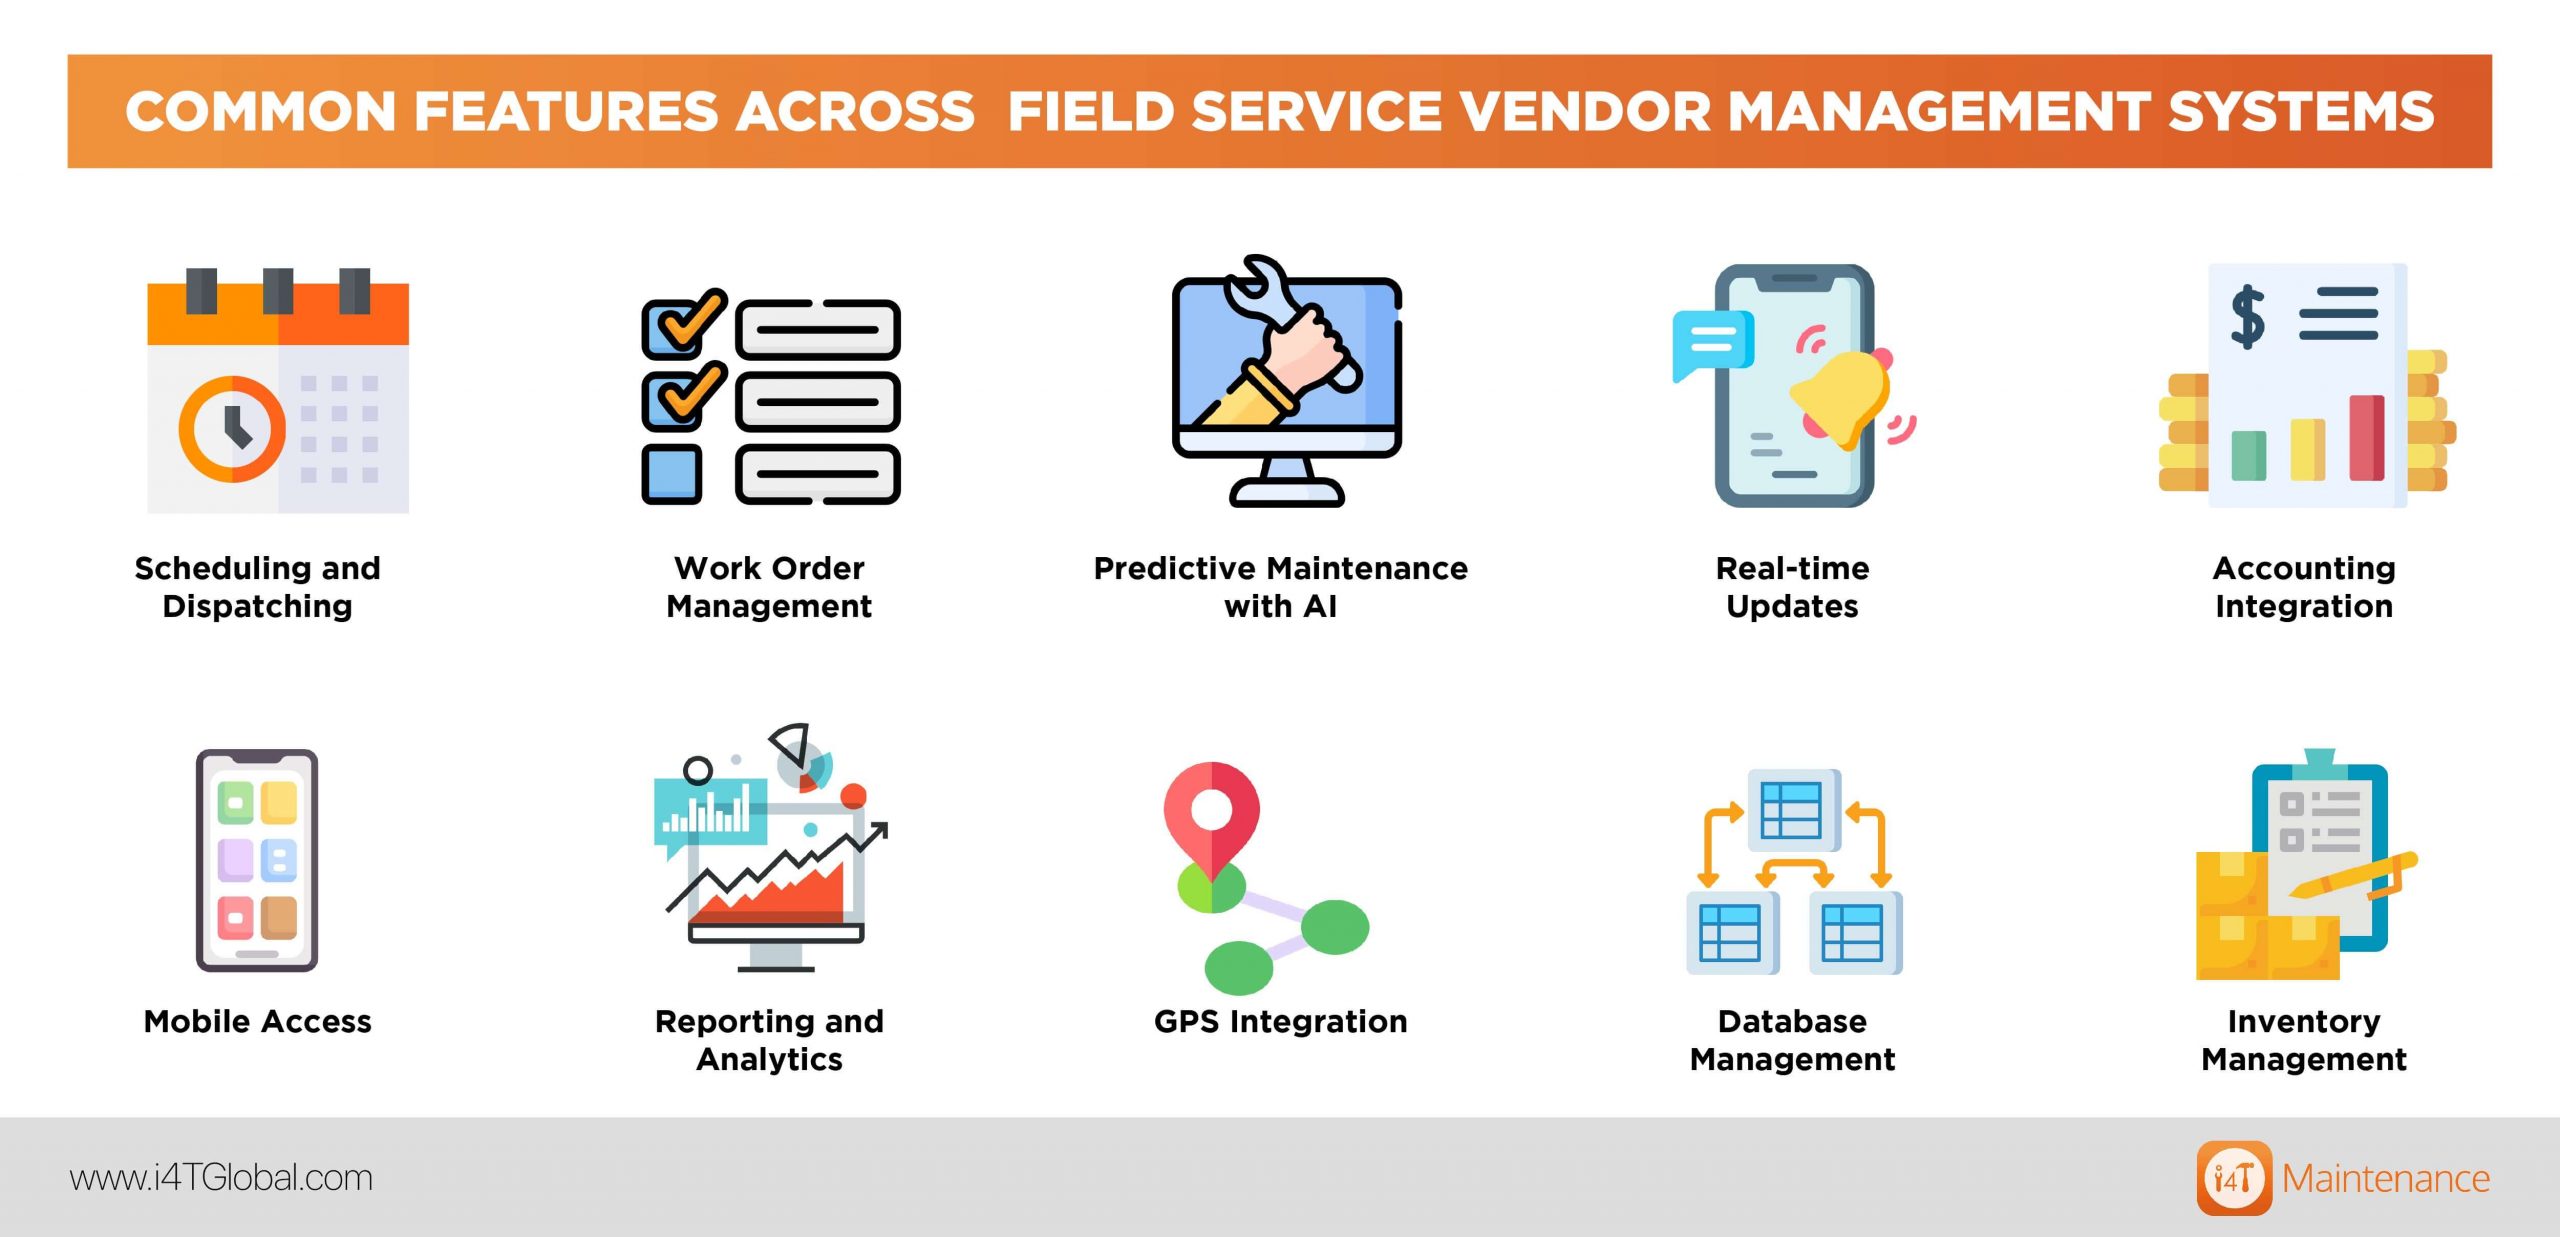 Common features across field service vendor management systems - i4T Global